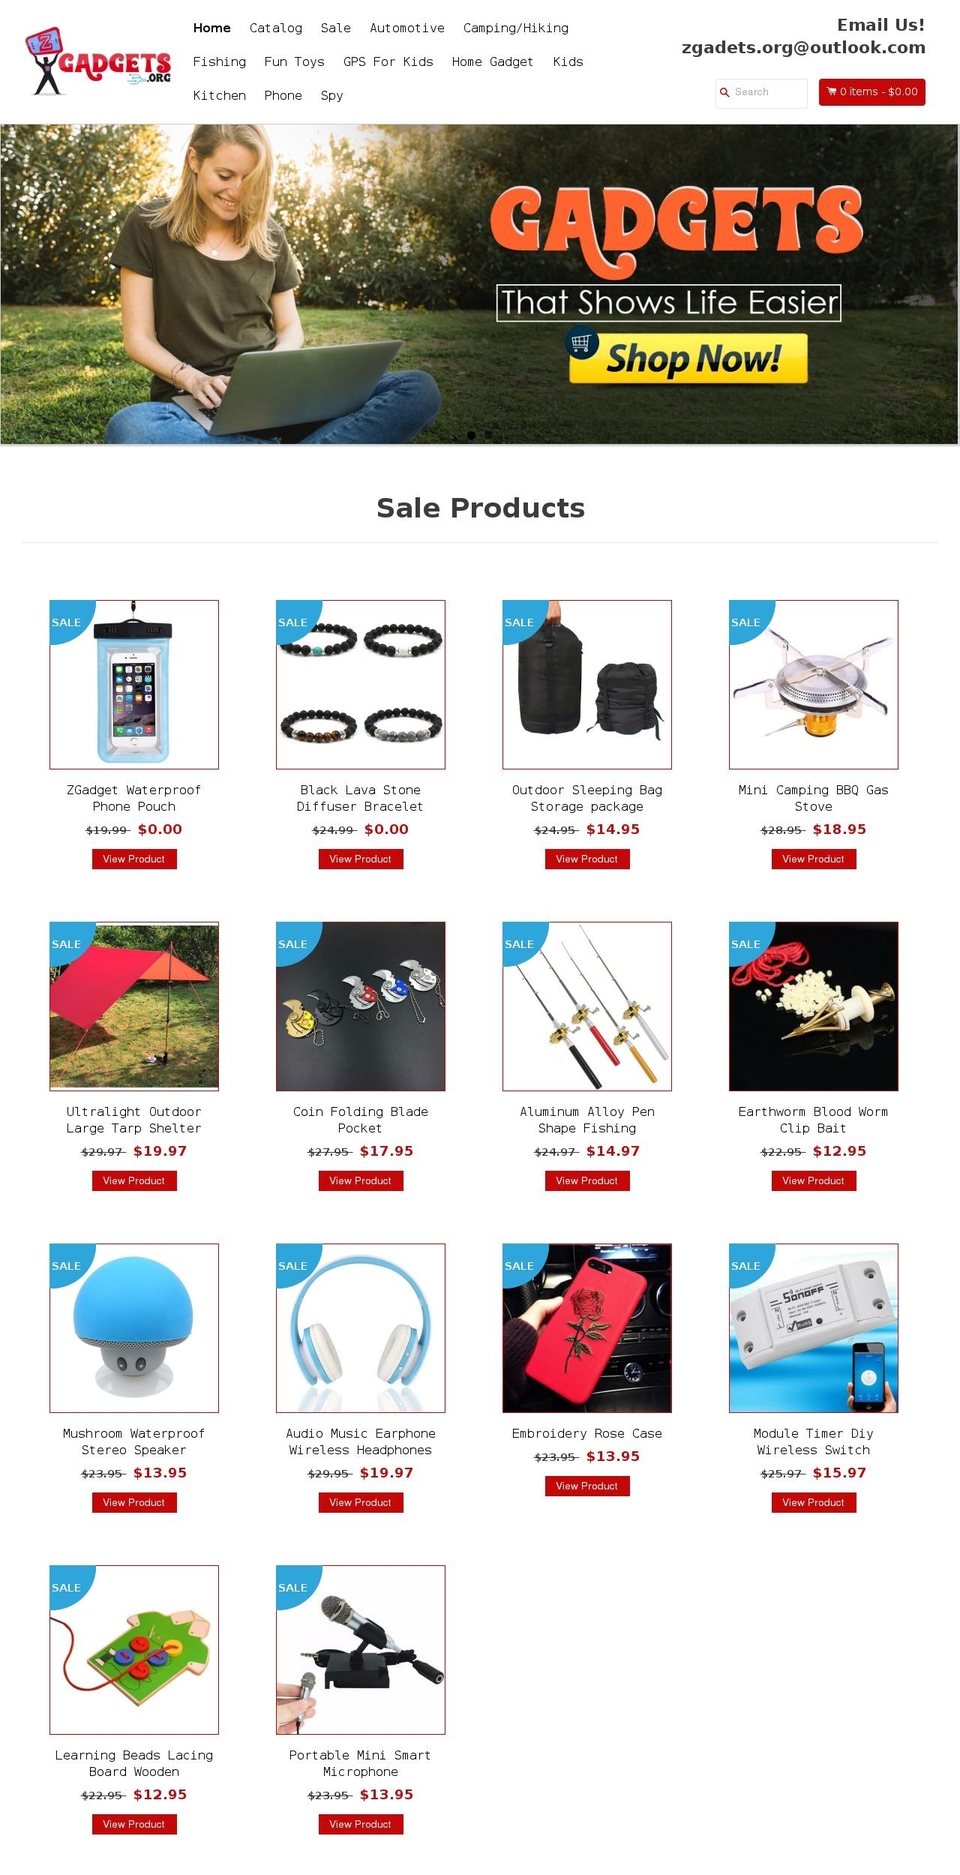 EcomClub Shopify theme site example zgadgets.org